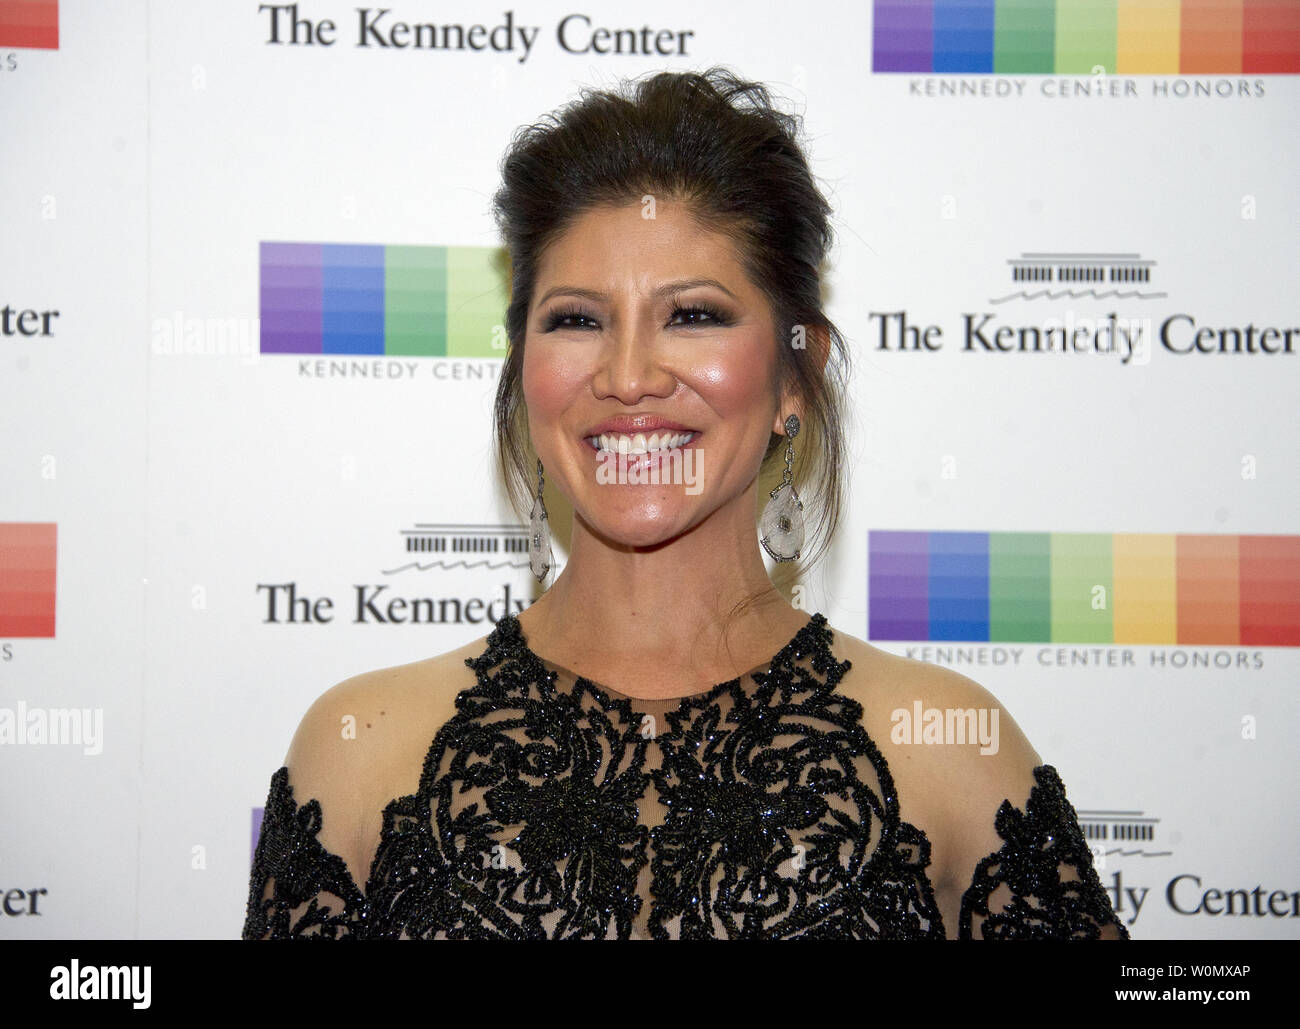 Julie Chen arrives for the formal Artist's Dinner honoring the recipients of the 40th Annual Kennedy Center Honors hosted by United States Secretary of State Rex Tillerson at the US Department of State in Washington, D.C. on Saturday, December 2, 2017. The 2017 honorees are: American dancer and choreographer Carmen de Lavallade; Cuban American singer-songwriter and actress Gloria Estefan; American hip hop artist and entertainment icon LL COOL J; American television writer and producer Norman Lear; and American musician and record producer Lionel Richie.    Photo by Ron Sachs/UPI Stock Photo